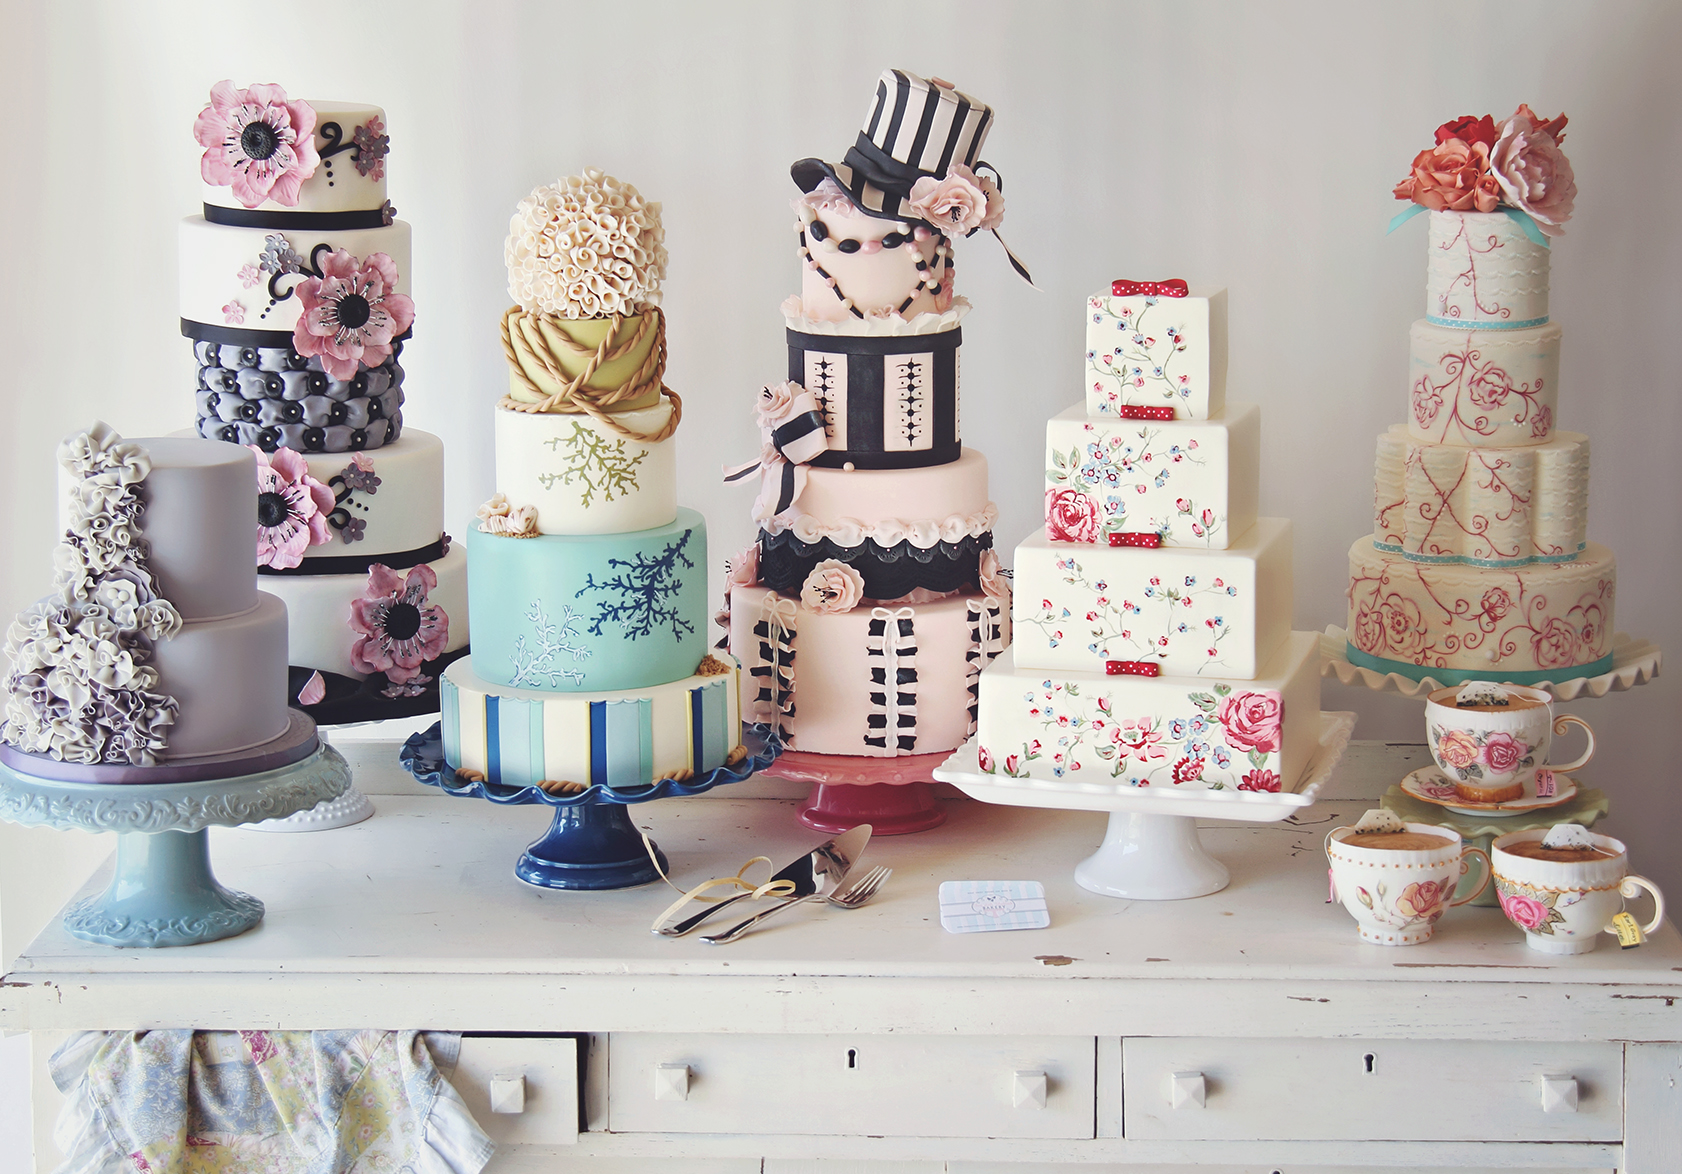 TLB Cake Gallery